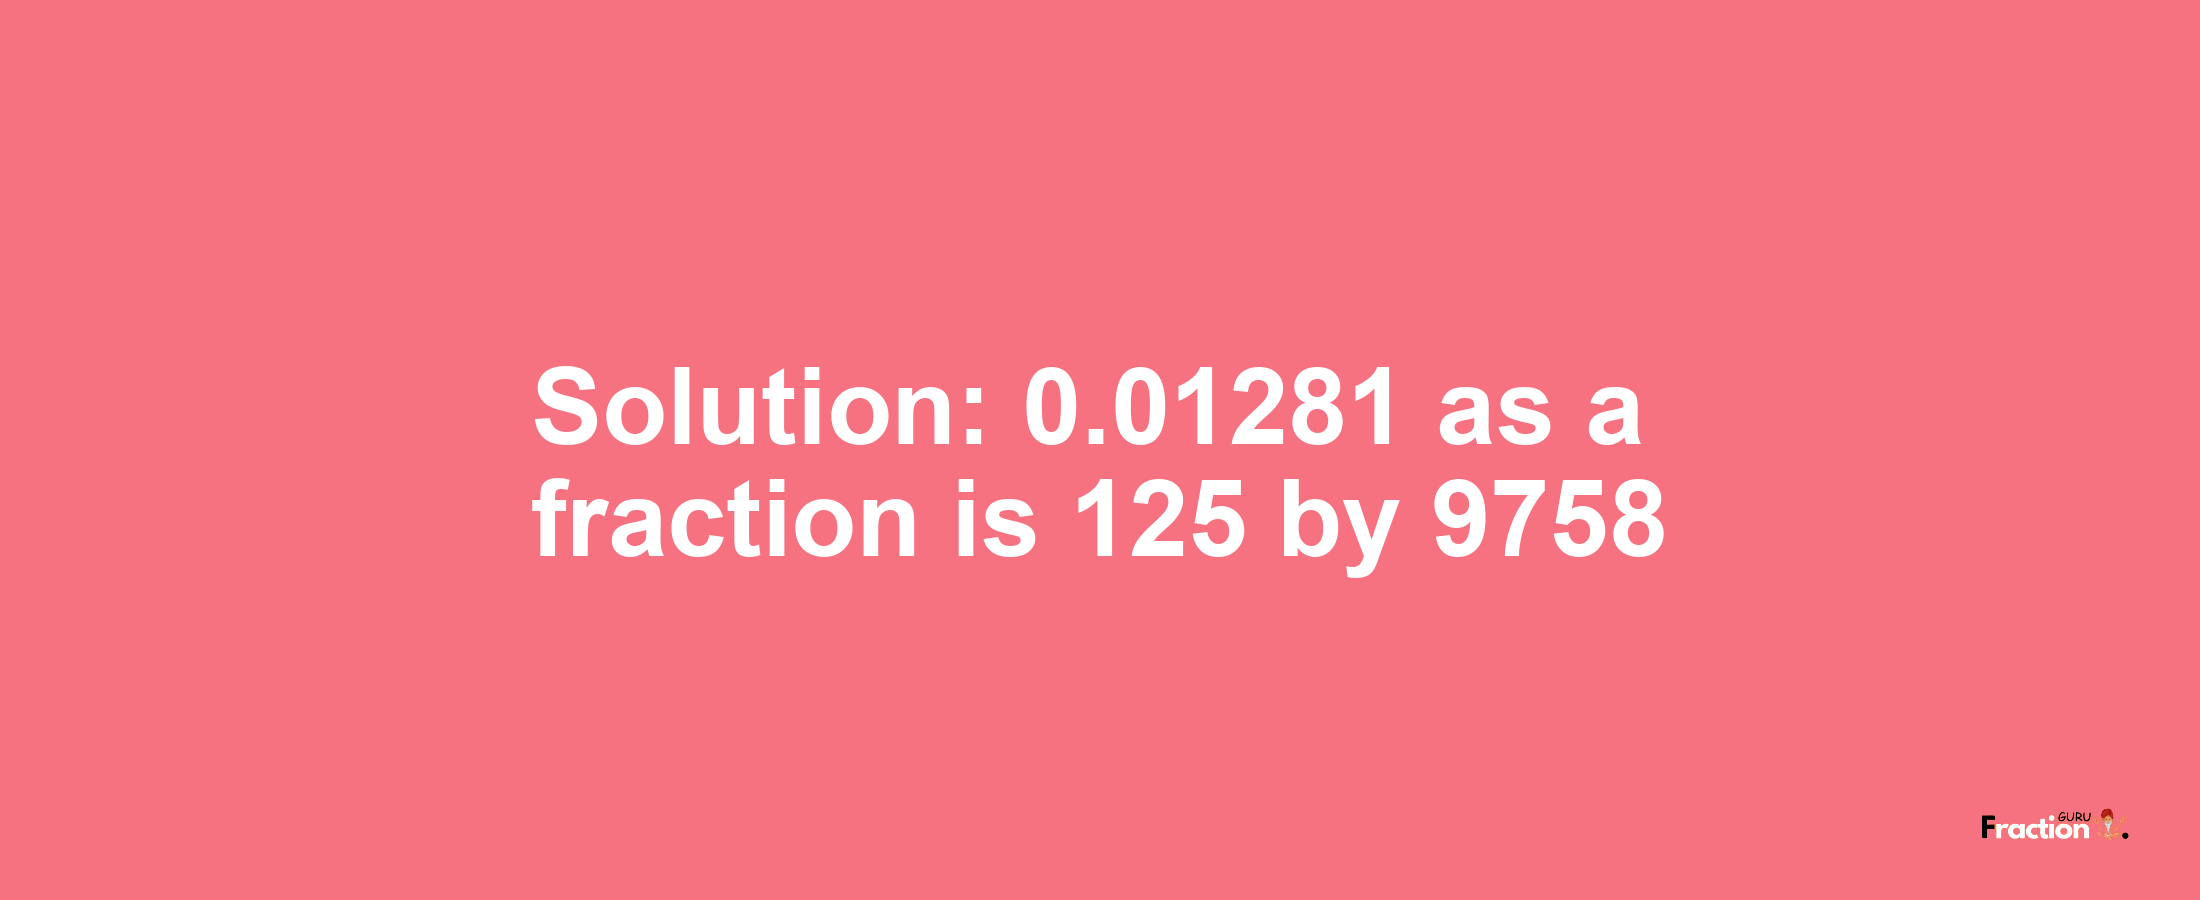 Solution:0.01281 as a fraction is 125/9758